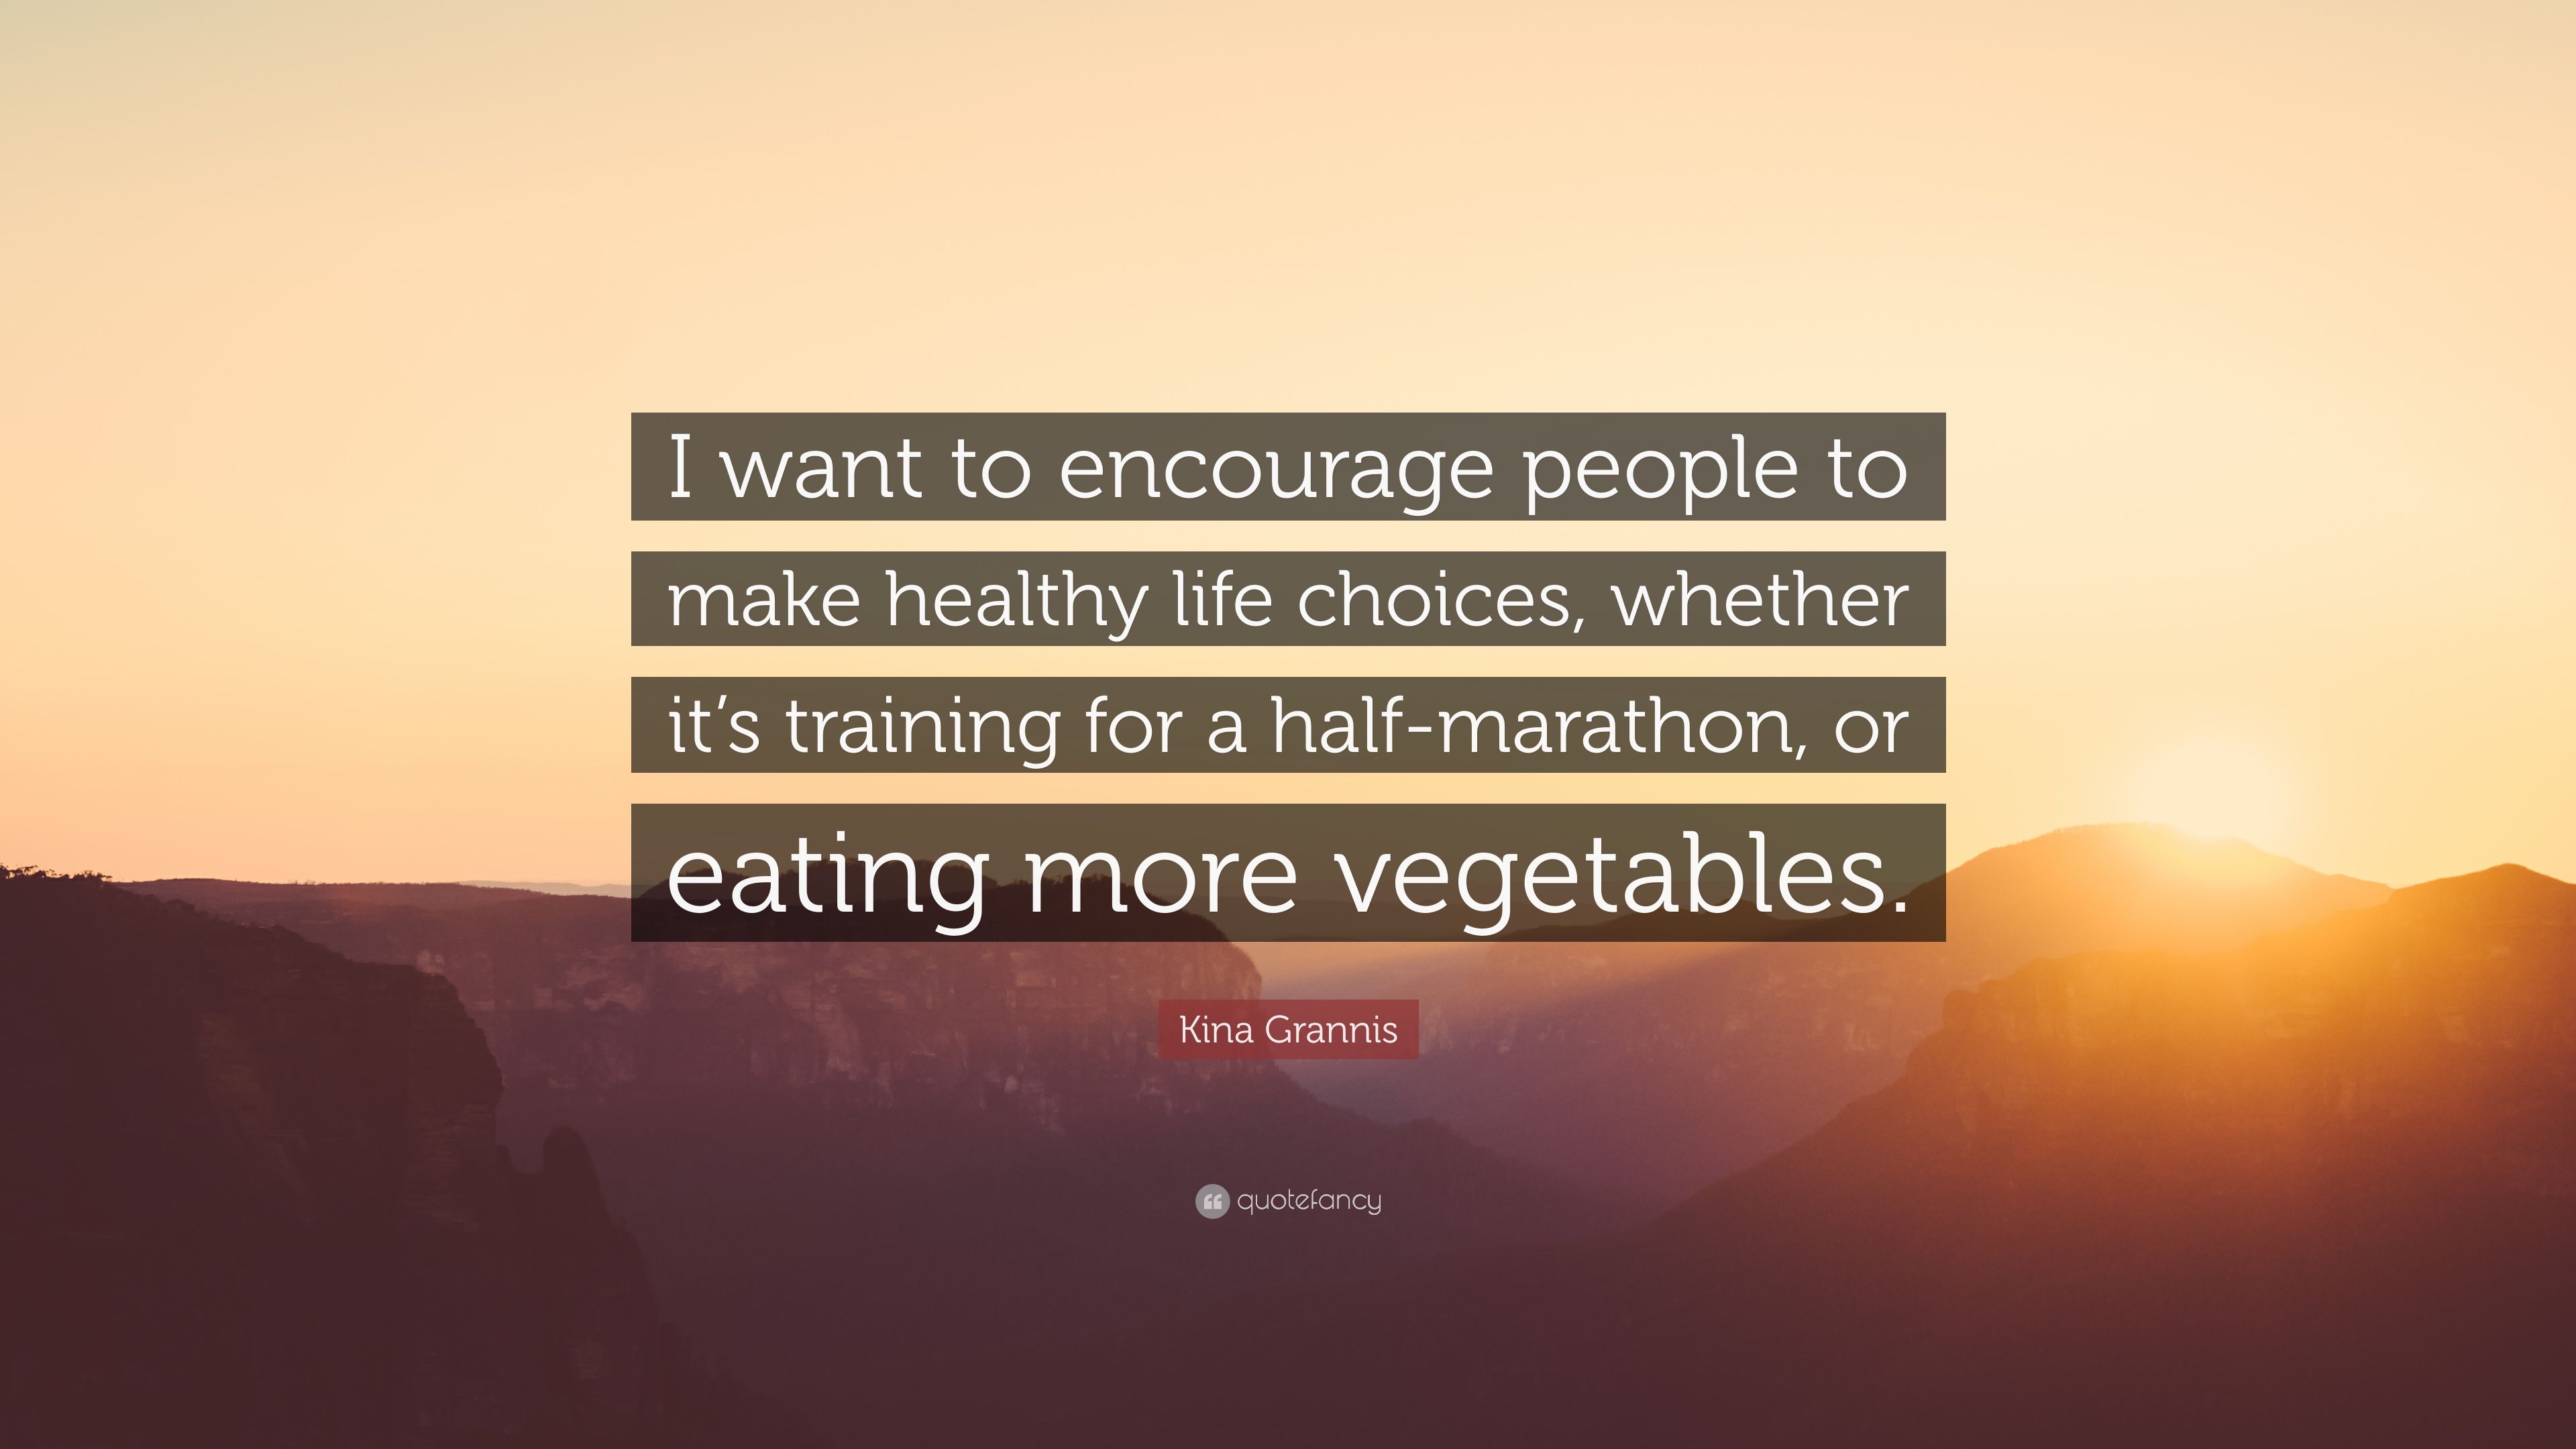 Kina Grannis Quote: “I want to encourage people to make healthy